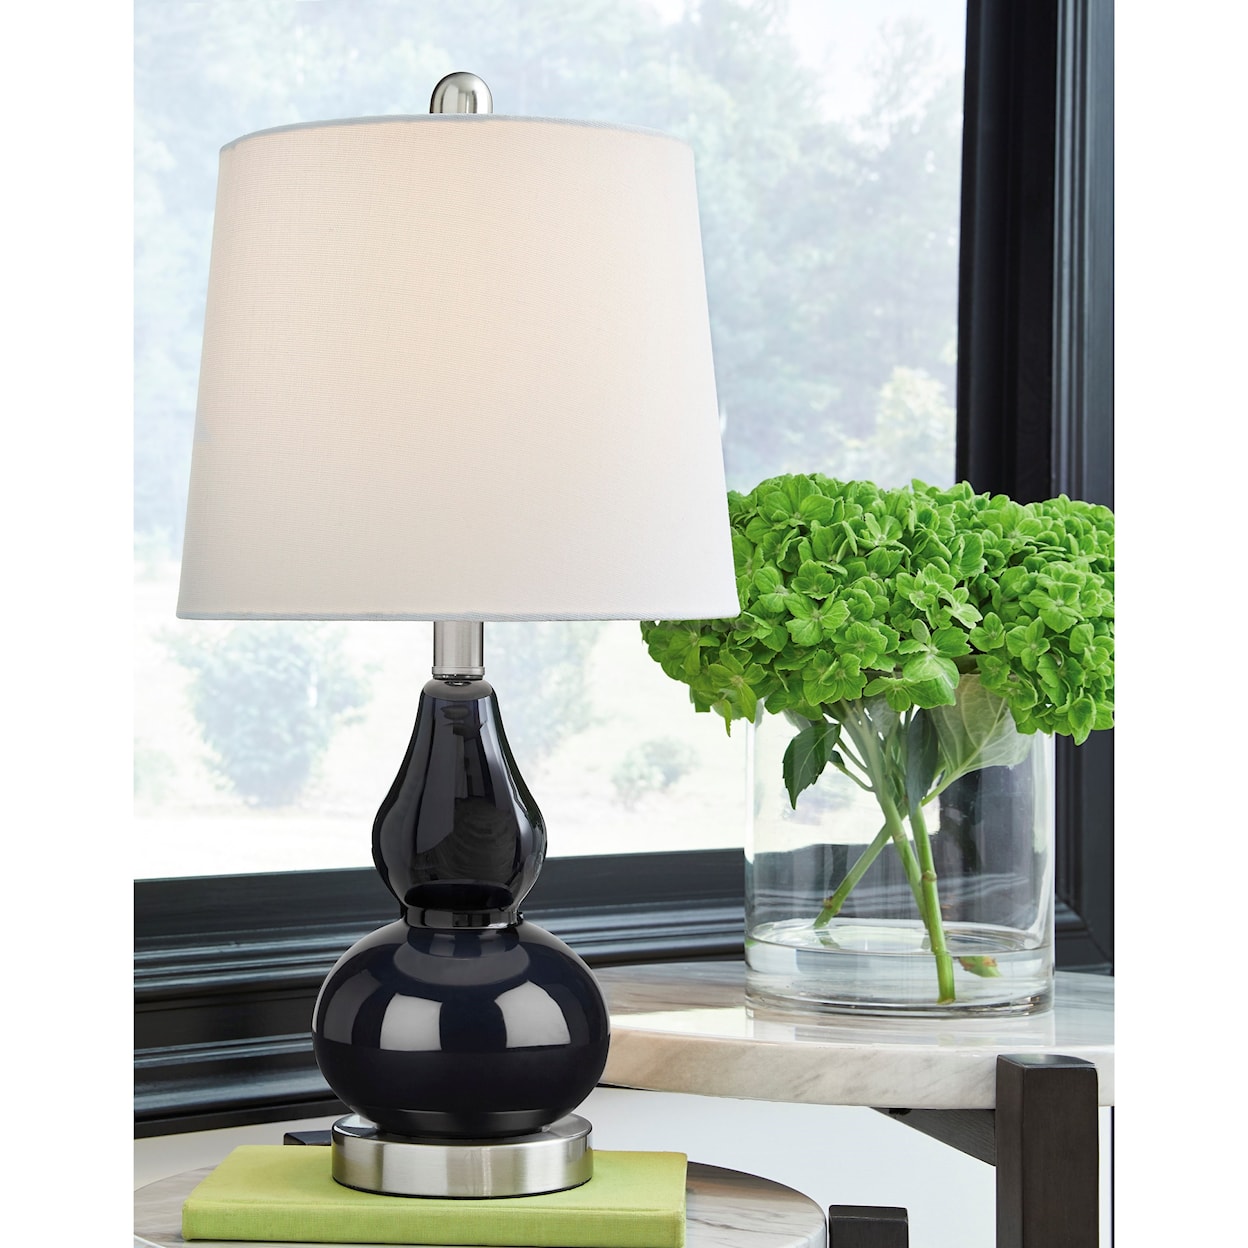 Signature Design by Ashley Lamps - Contemporary Makana Navy/Silver Glass Table Lamp